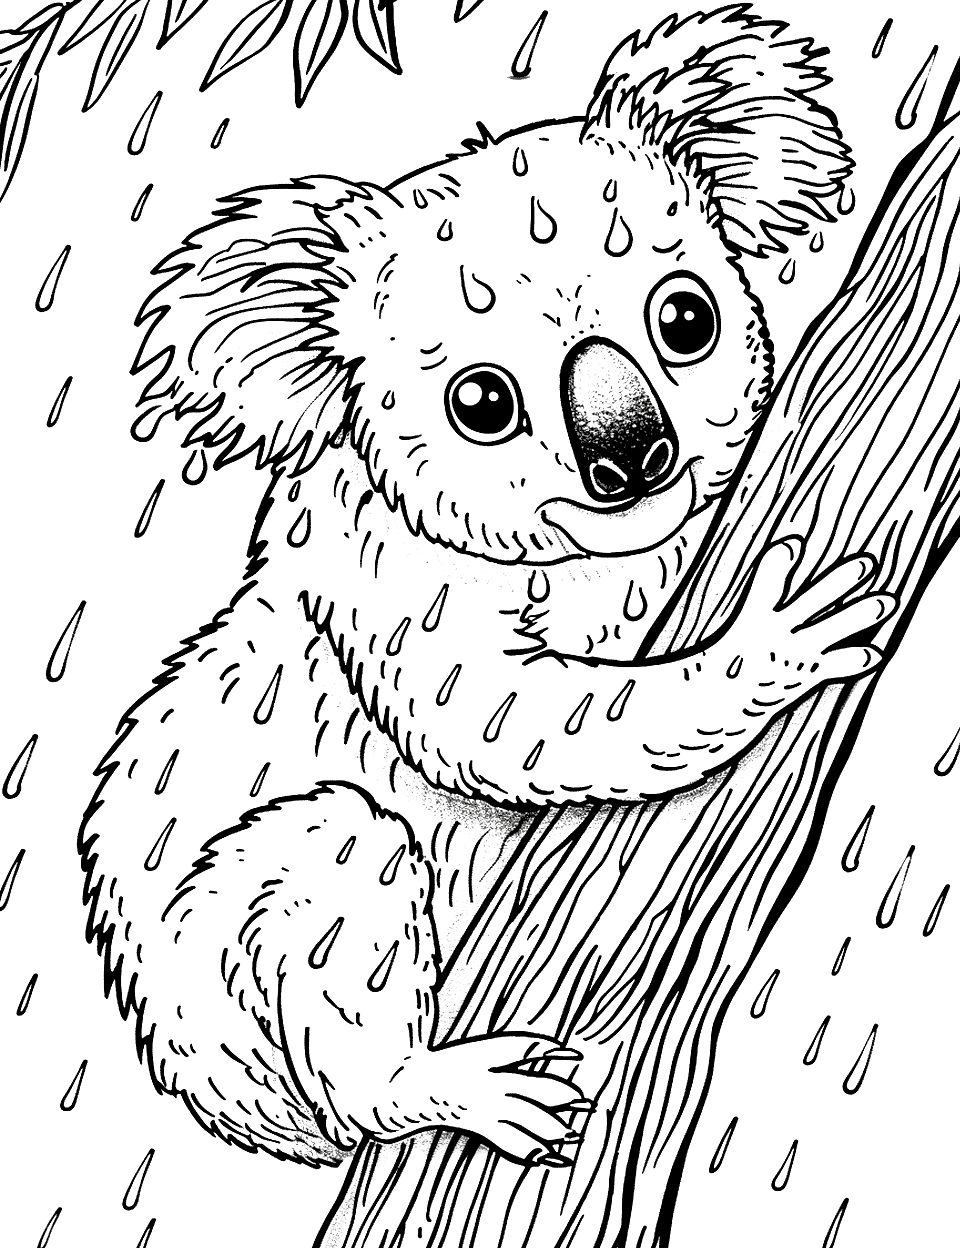 Koala on a Rainy Day Coloring Page - A koala peeking out from behind a tree, as raindrops fall gently around it.